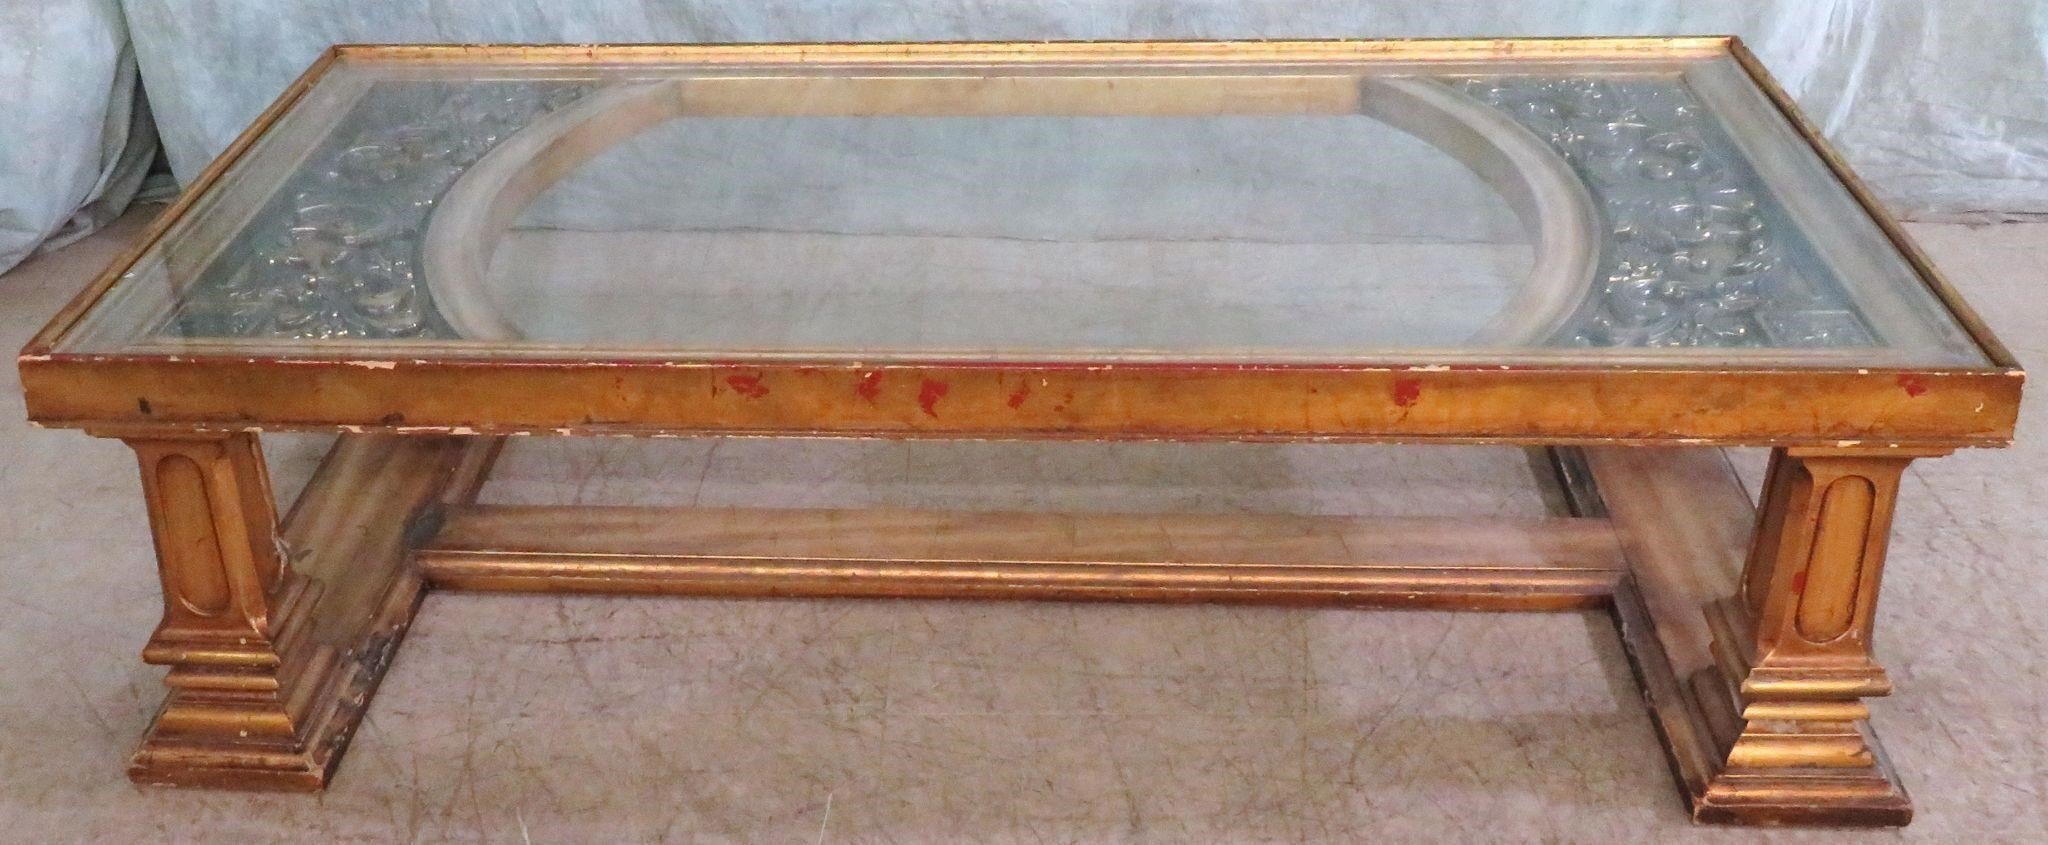 GOLD-TONED VINTAGE GLASS TOP COFFEE TABLE